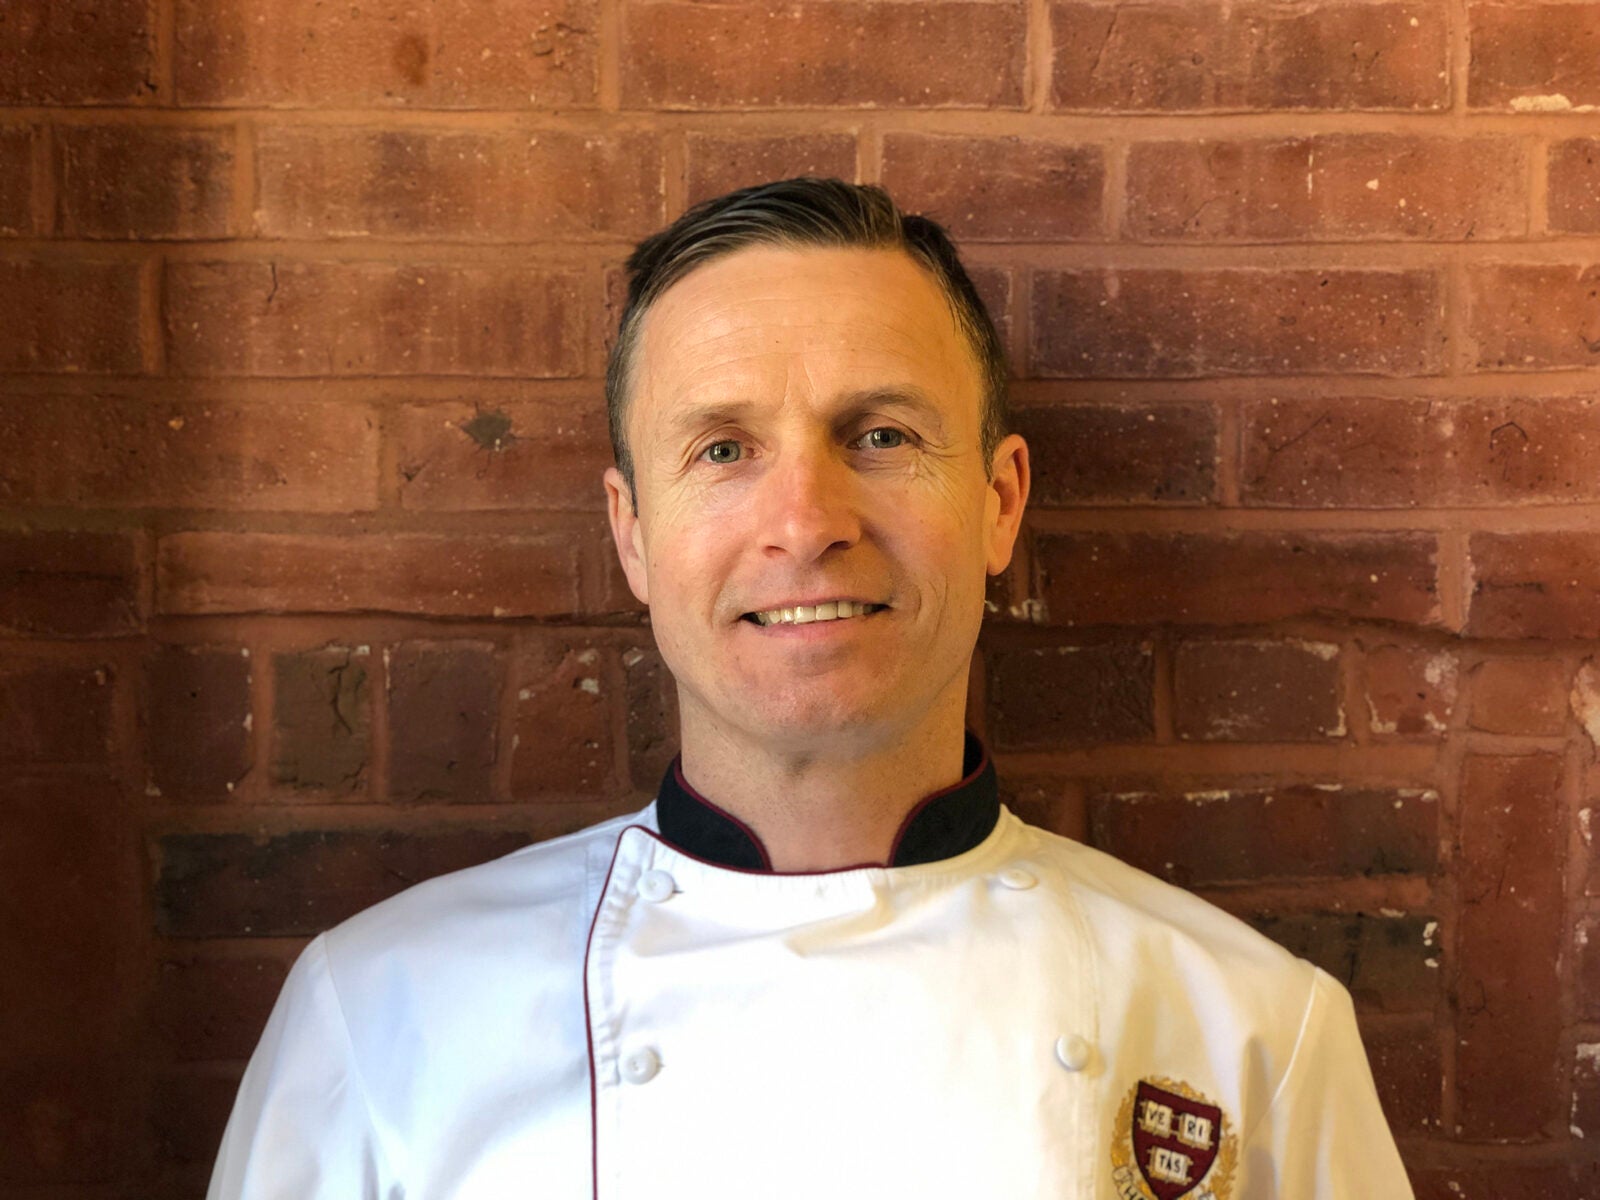 Headshot of chef Ludger Wessels against a brick wall